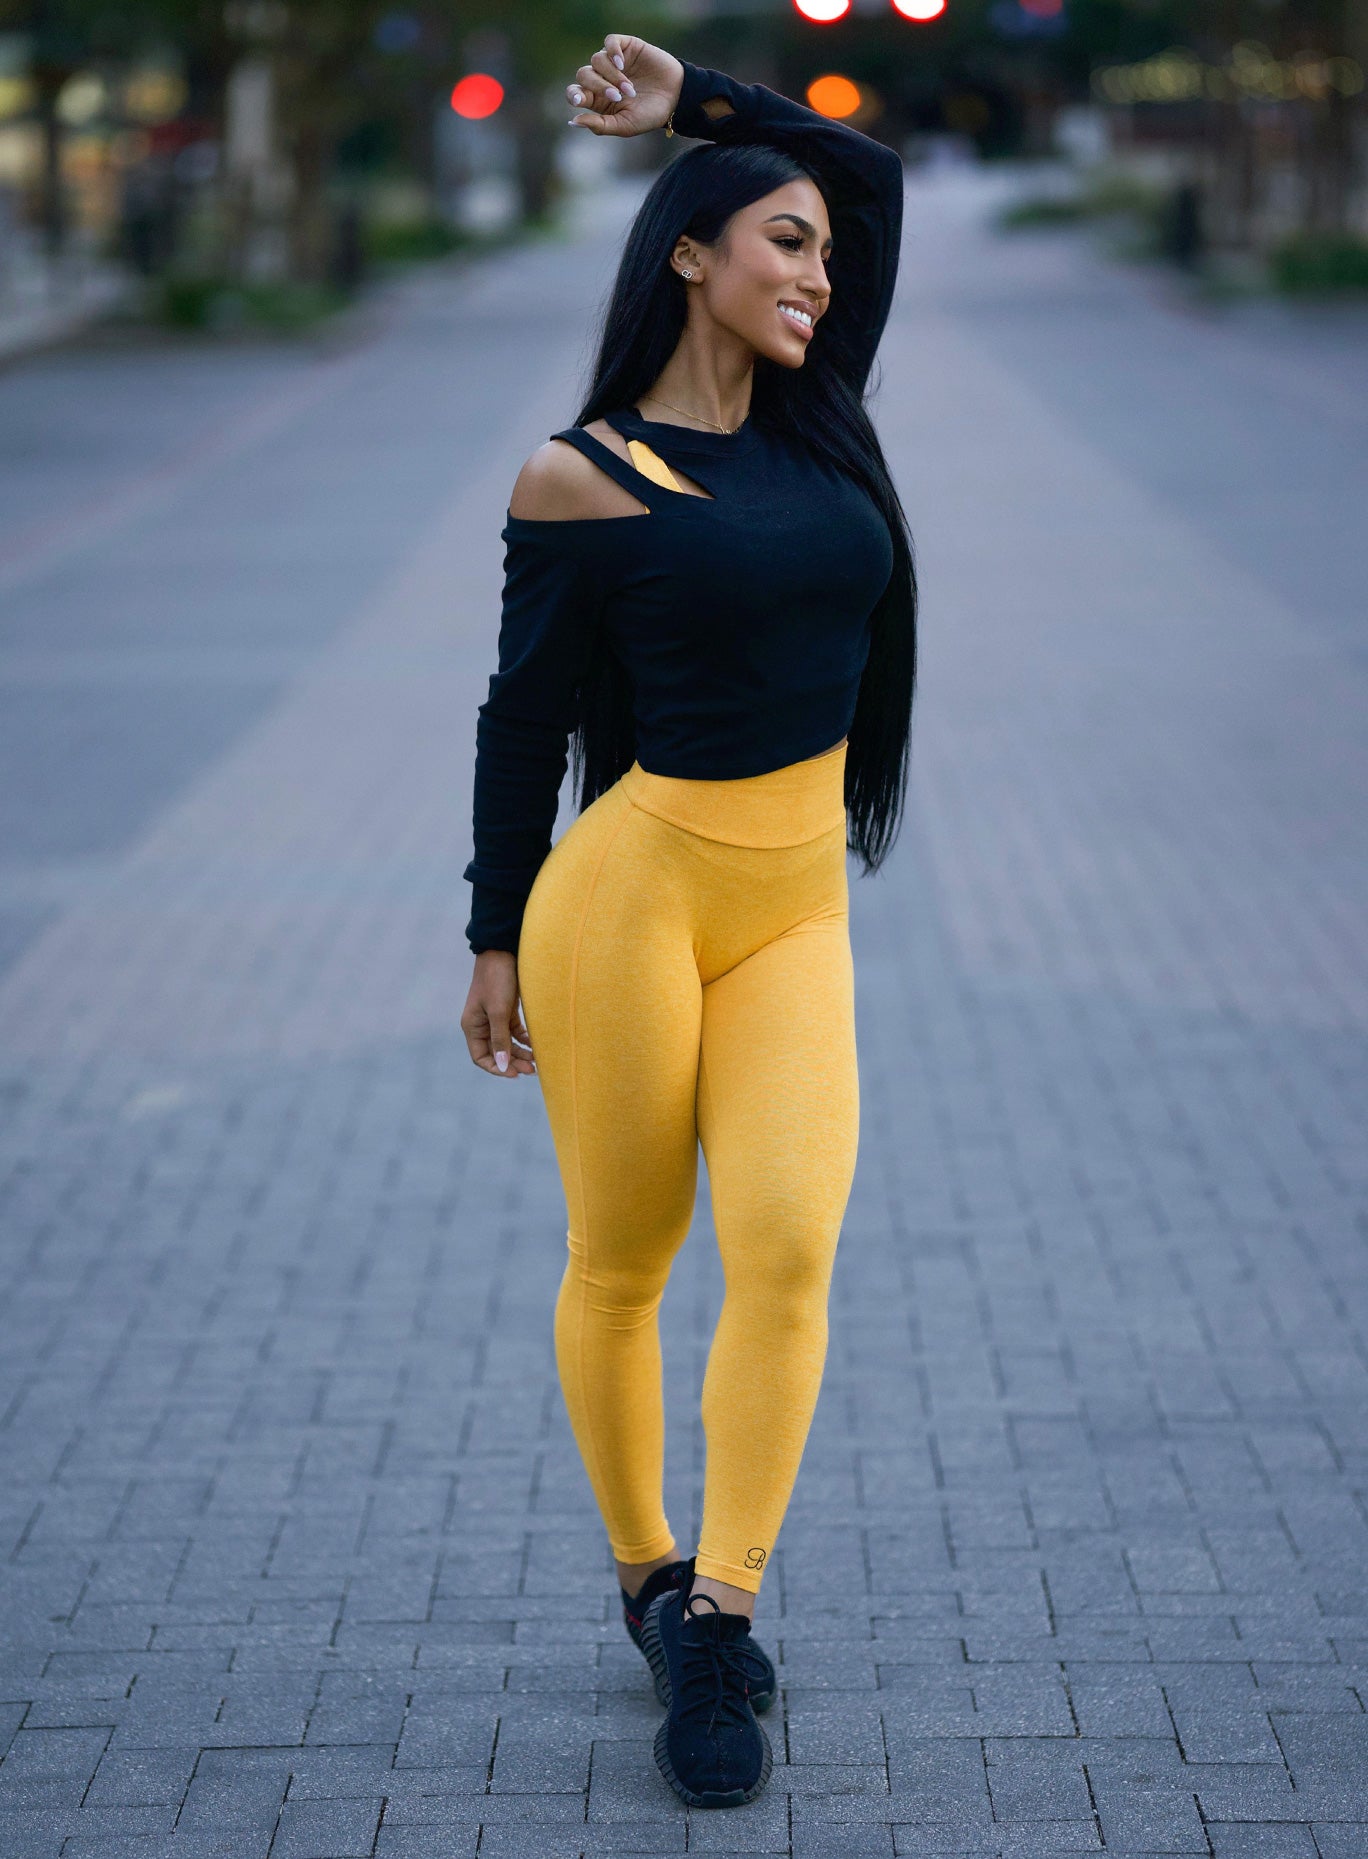 Right side view of the model wearing our boost leggings in sunkissed color and a black top